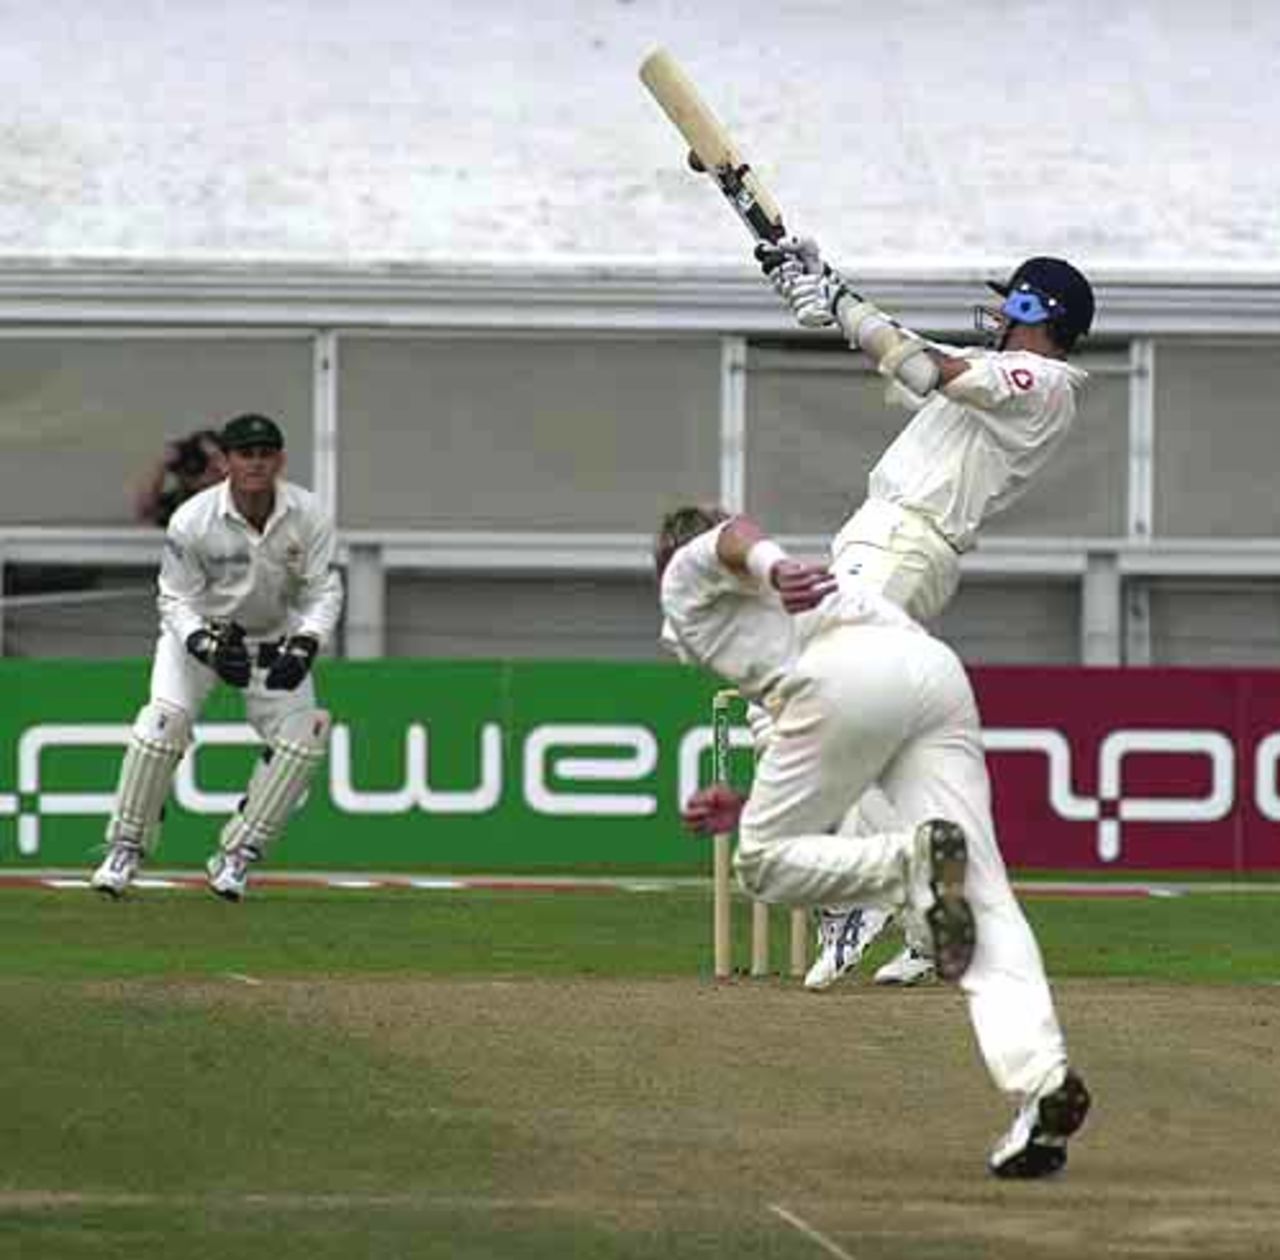 Andy Caddick does his best to reach a Brett Lee bouncer, England v Australia, The Ashes 4th npower Test, Leeds, 16-20 Aug 2001